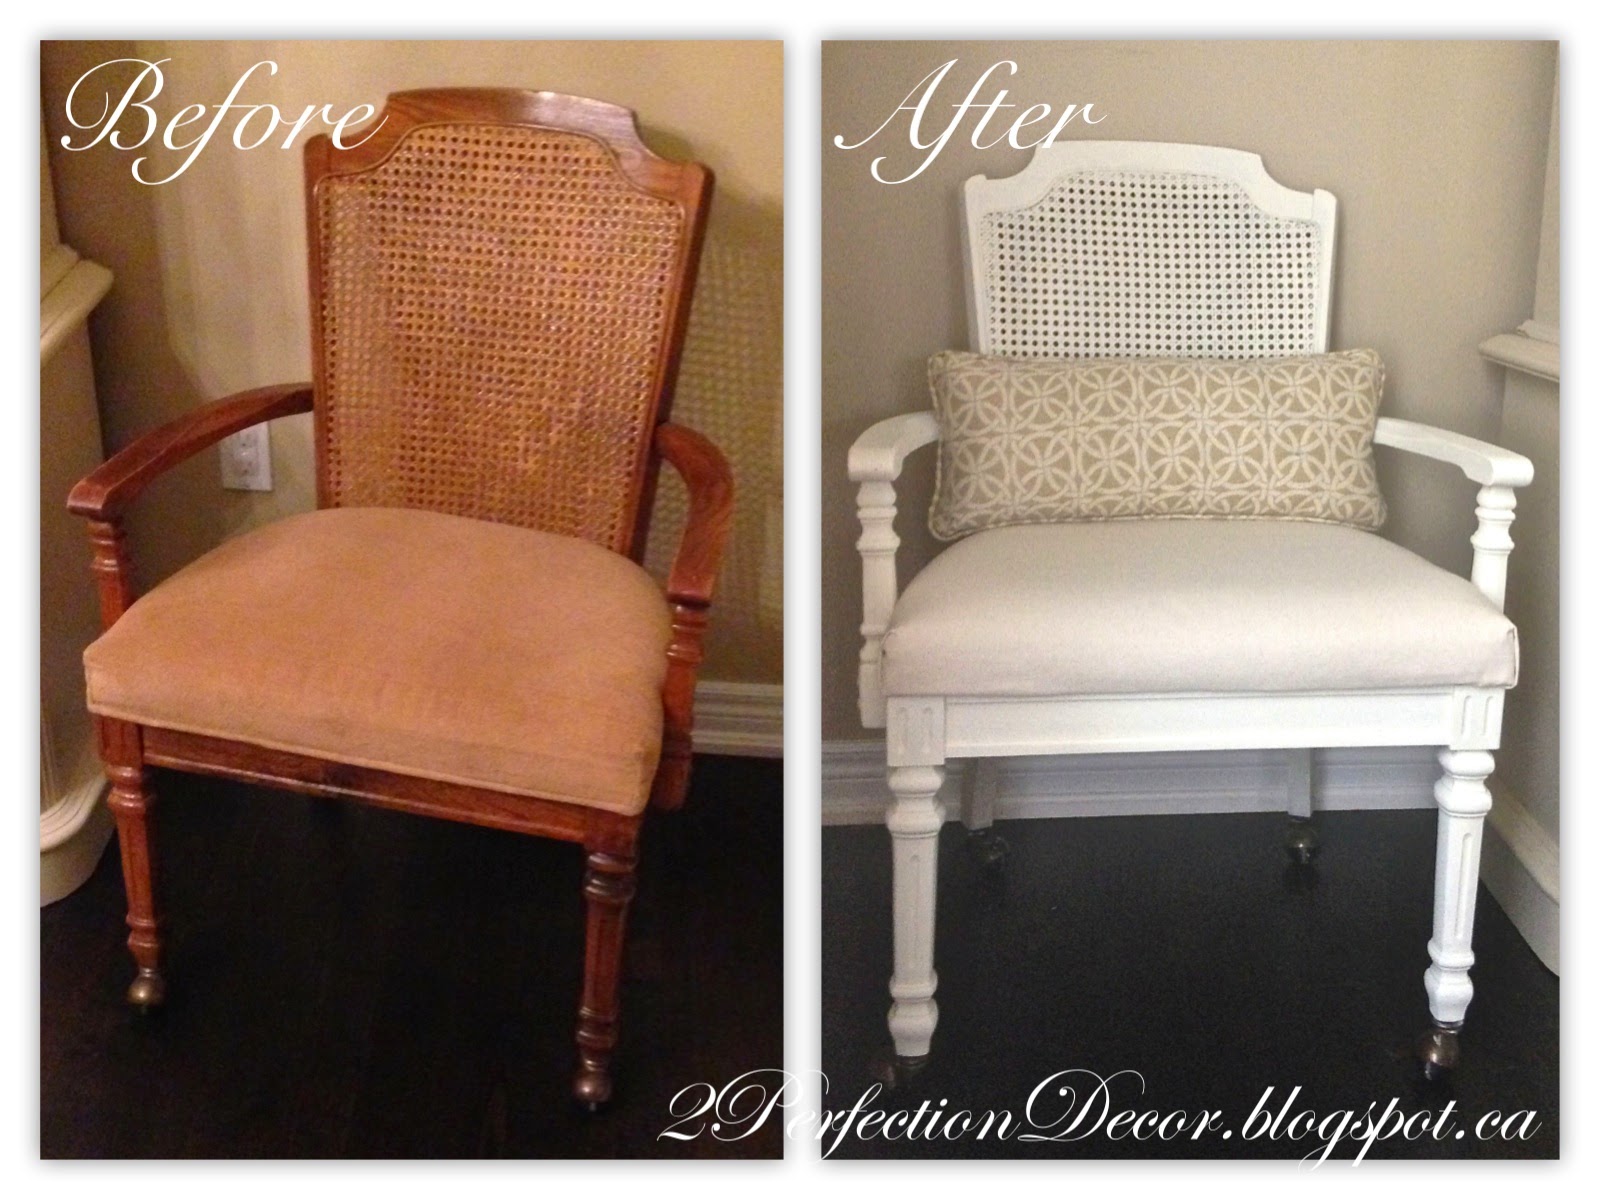 2Perfection Decor French Provincial Chair Makeover